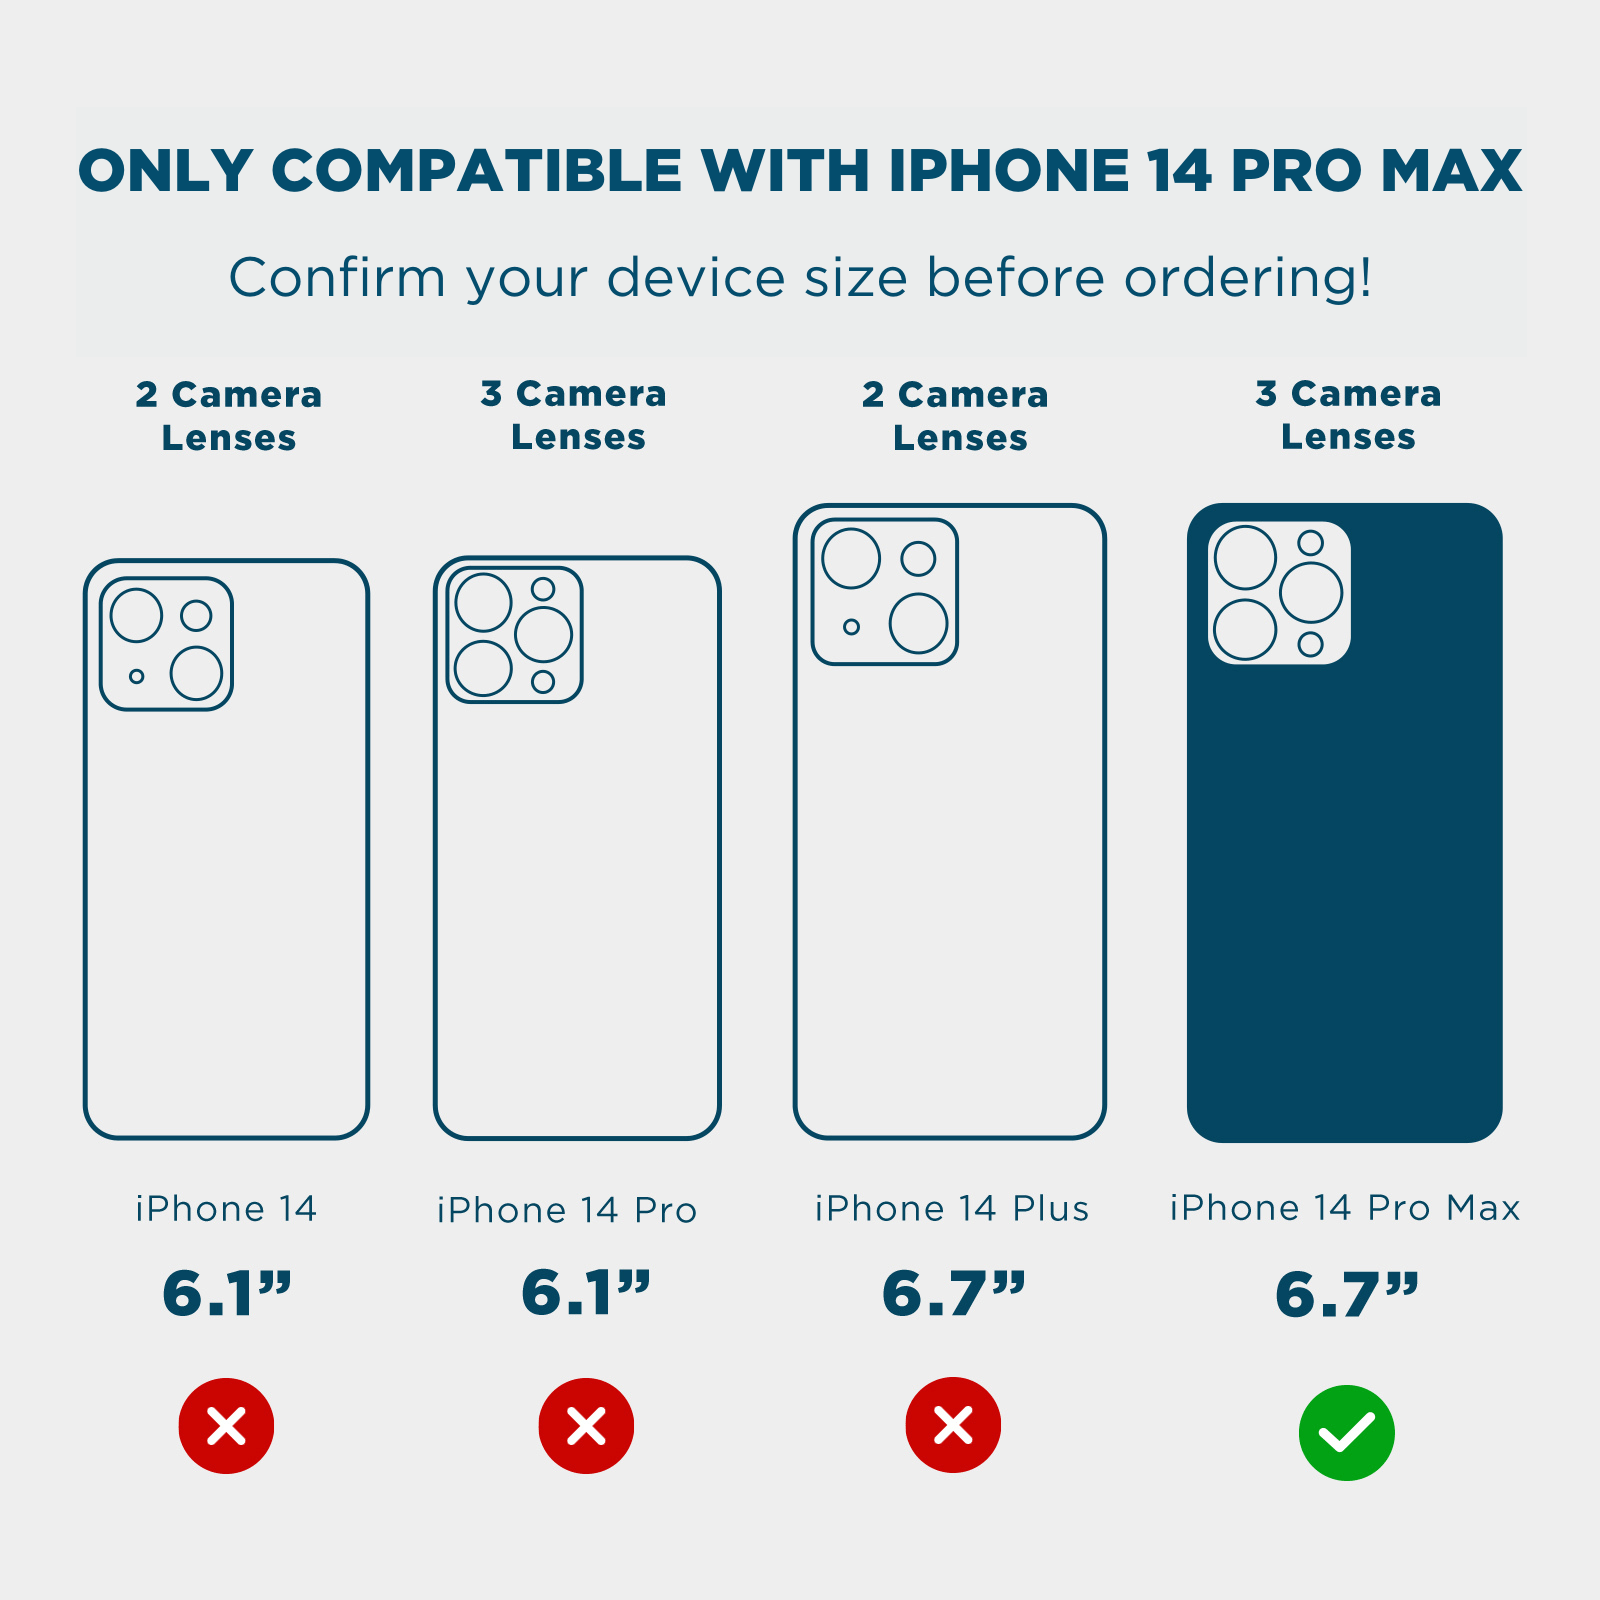 ONLY COMPATIBLE WITH IPHONE 14 PRO MAX. CONFIRM YOUR DEVICE SIZE BEFORE ORDERING. 2 CAMERA LENSES, 3 CAMERA LENSES, 2 CAMERA LENSES, 3 CAMERA LENSES, 6.1, 6.1, 6.7, 6.7. COLOR::CLEAR